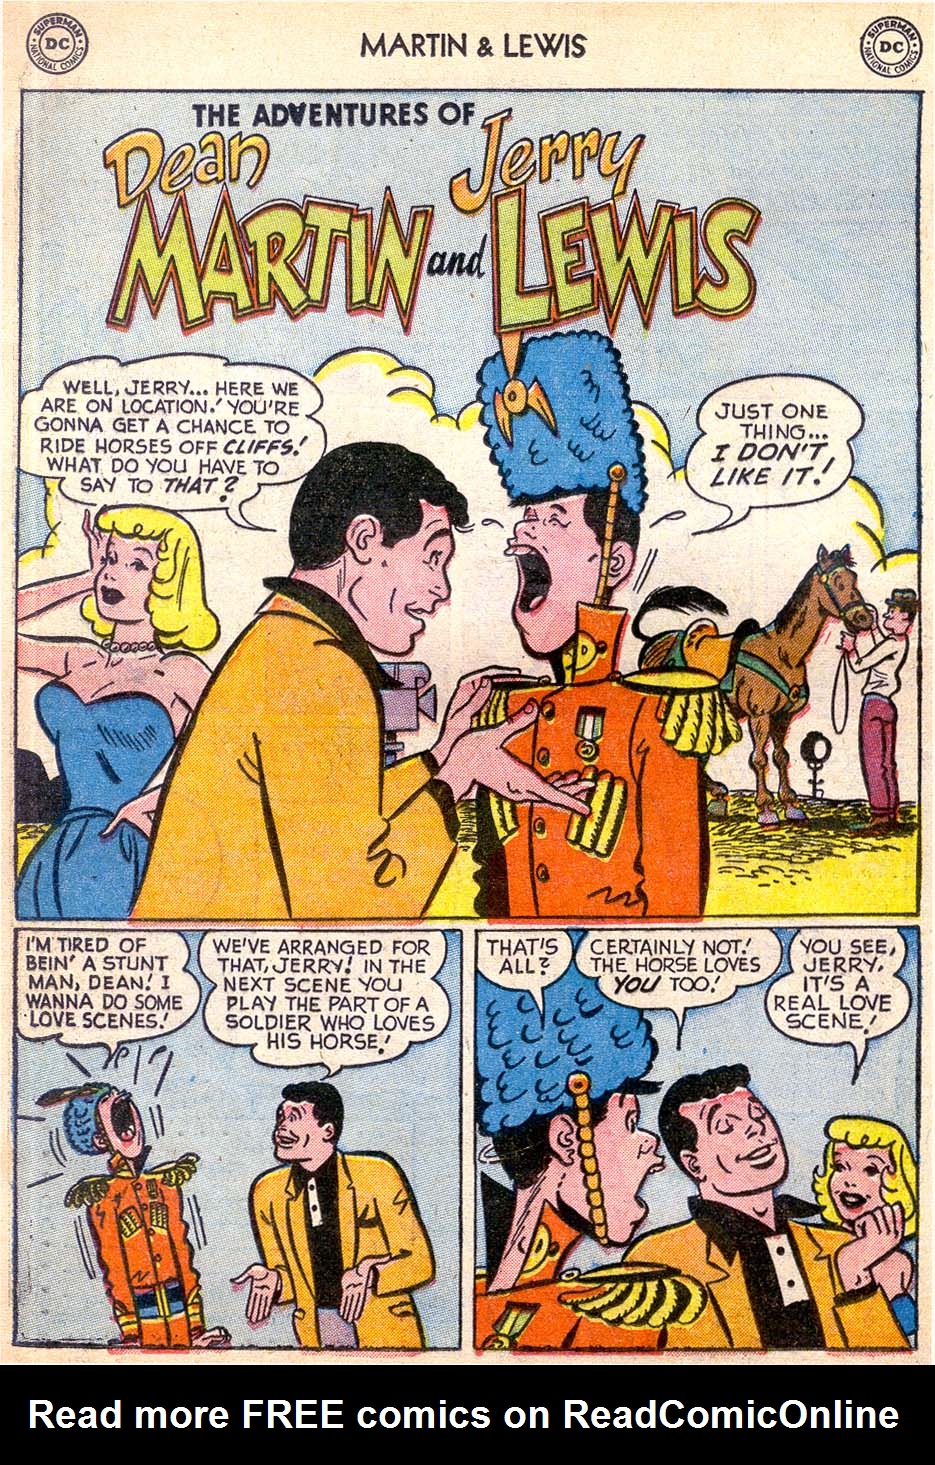 Read online The Adventures of Dean Martin and Jerry Lewis comic -  Issue #7 - 24